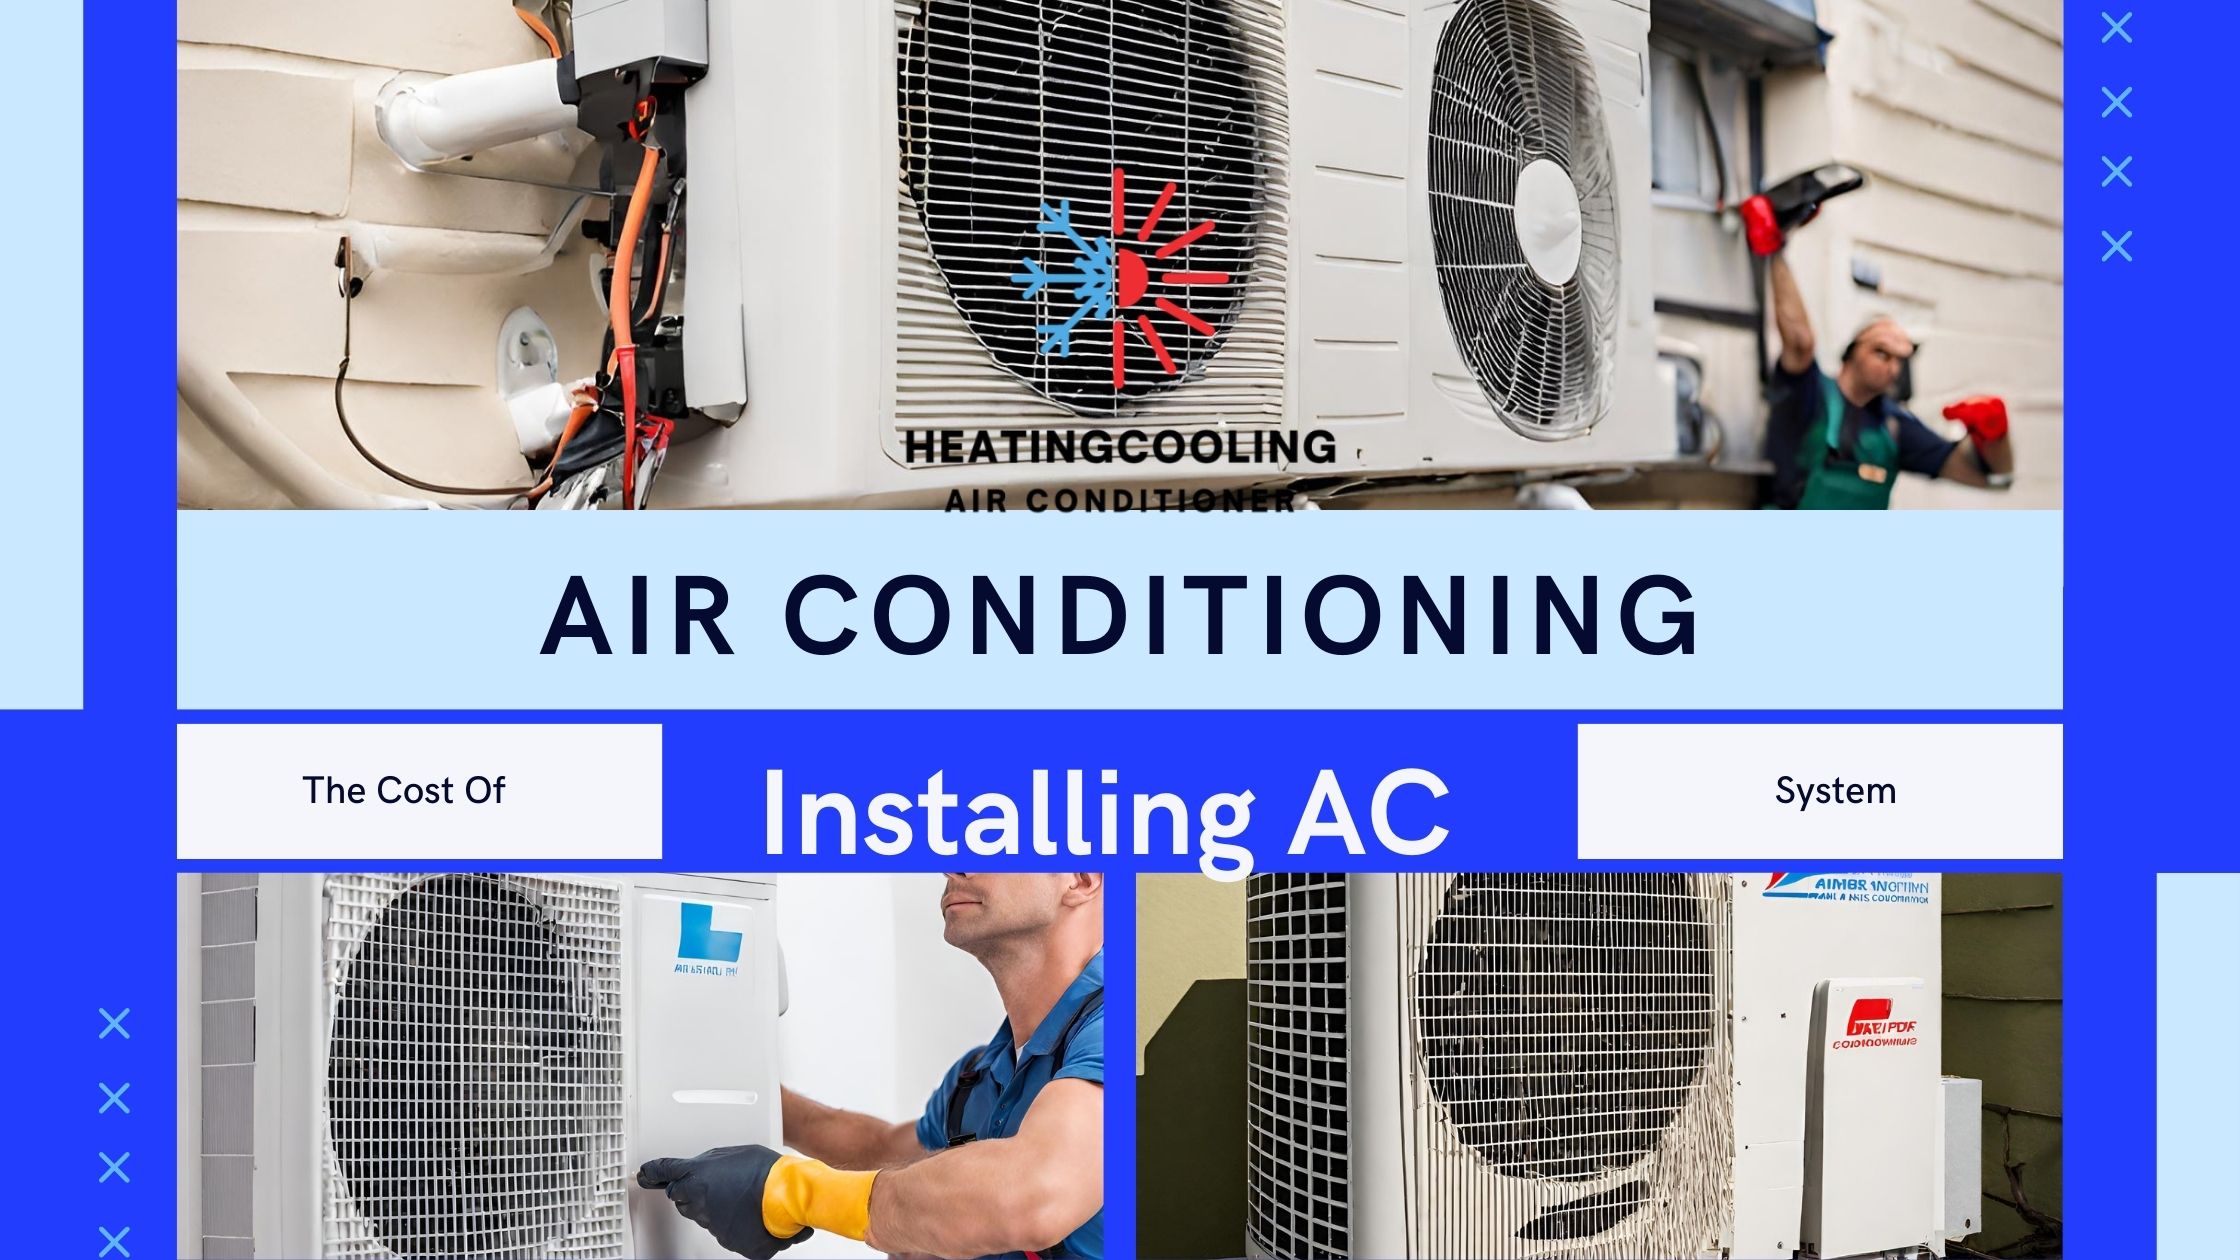 What Is The Cost Of Installing A Central Air Conditioning System?